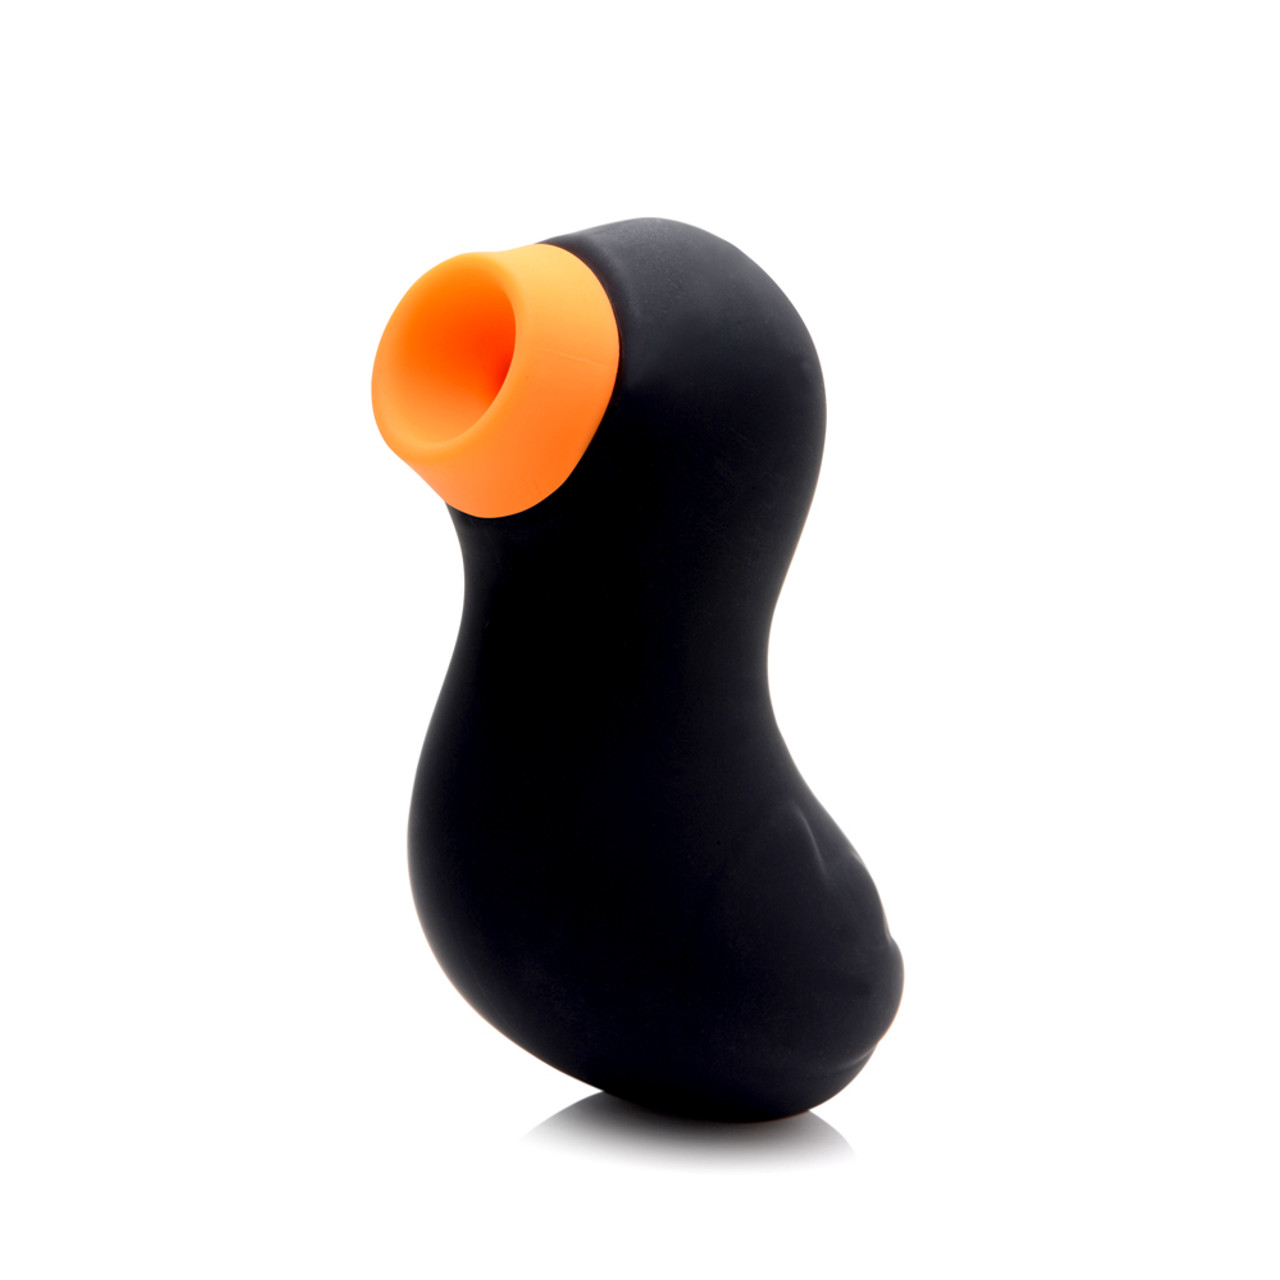 Buy the Shegasm Mini Finger-mounted 7-function Rechargeable